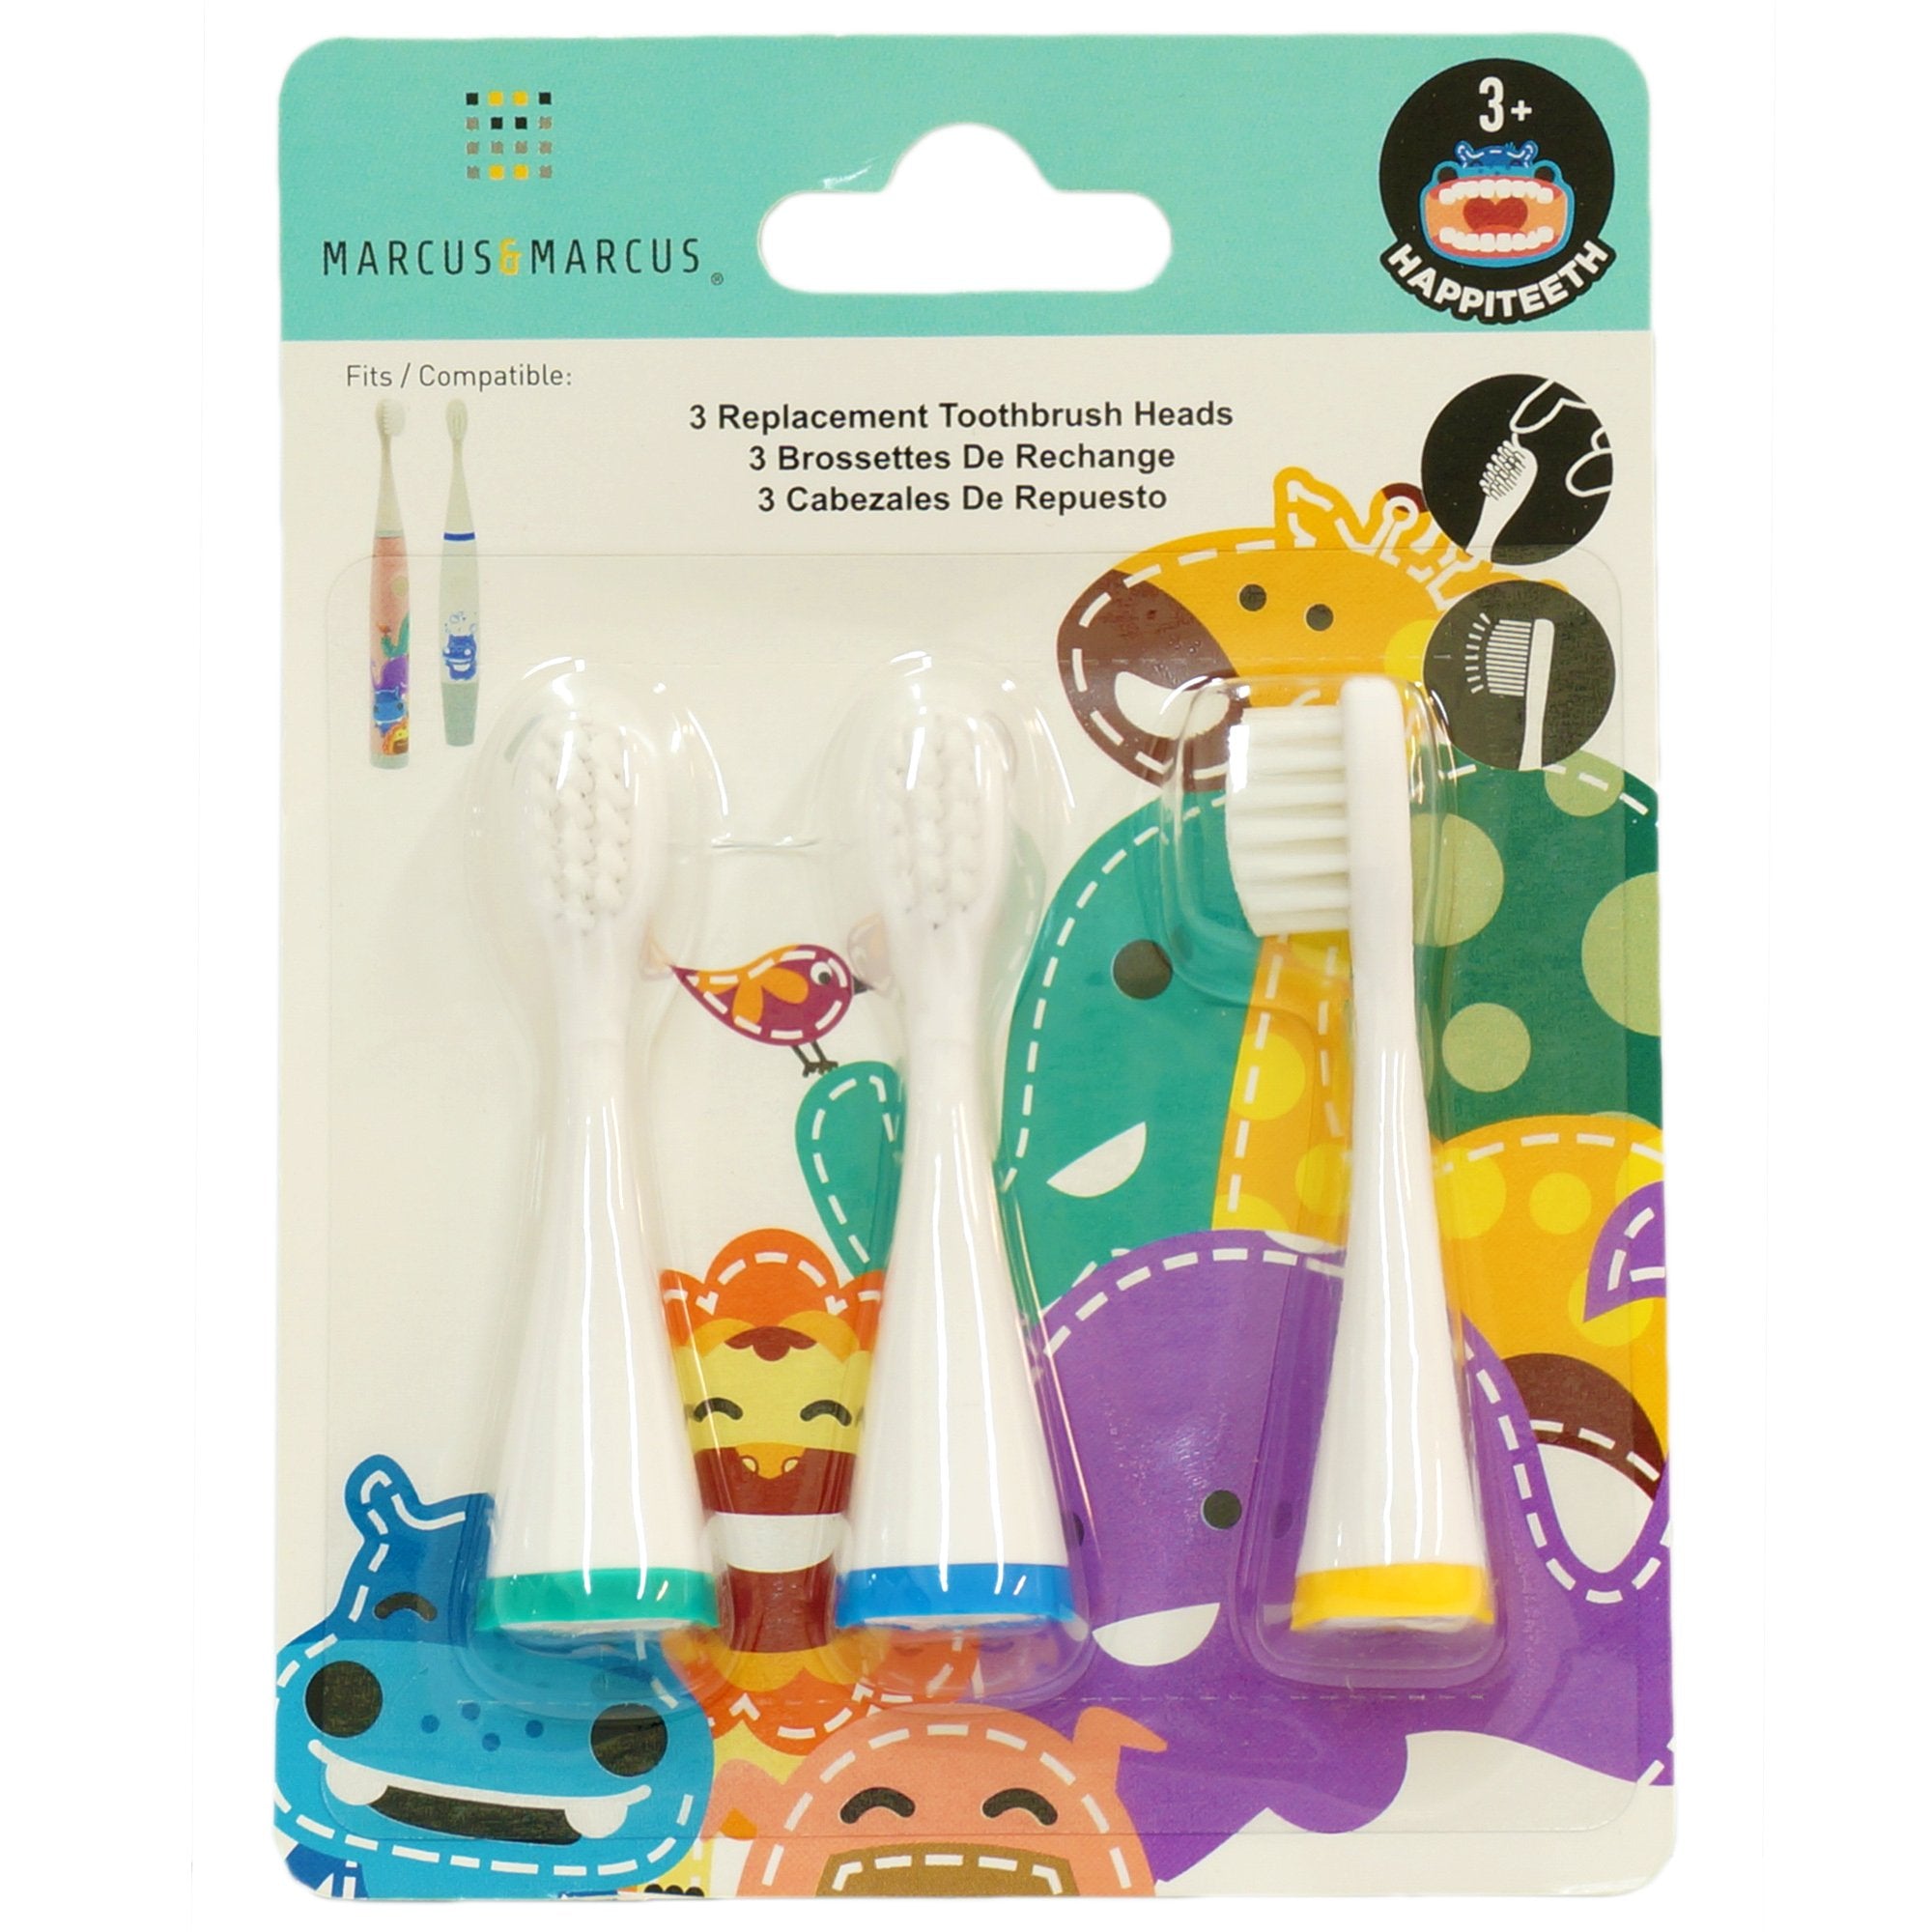 Marcus & Marcus Replacement Toothbrush Heads (Ollie, Lucas, Lola)